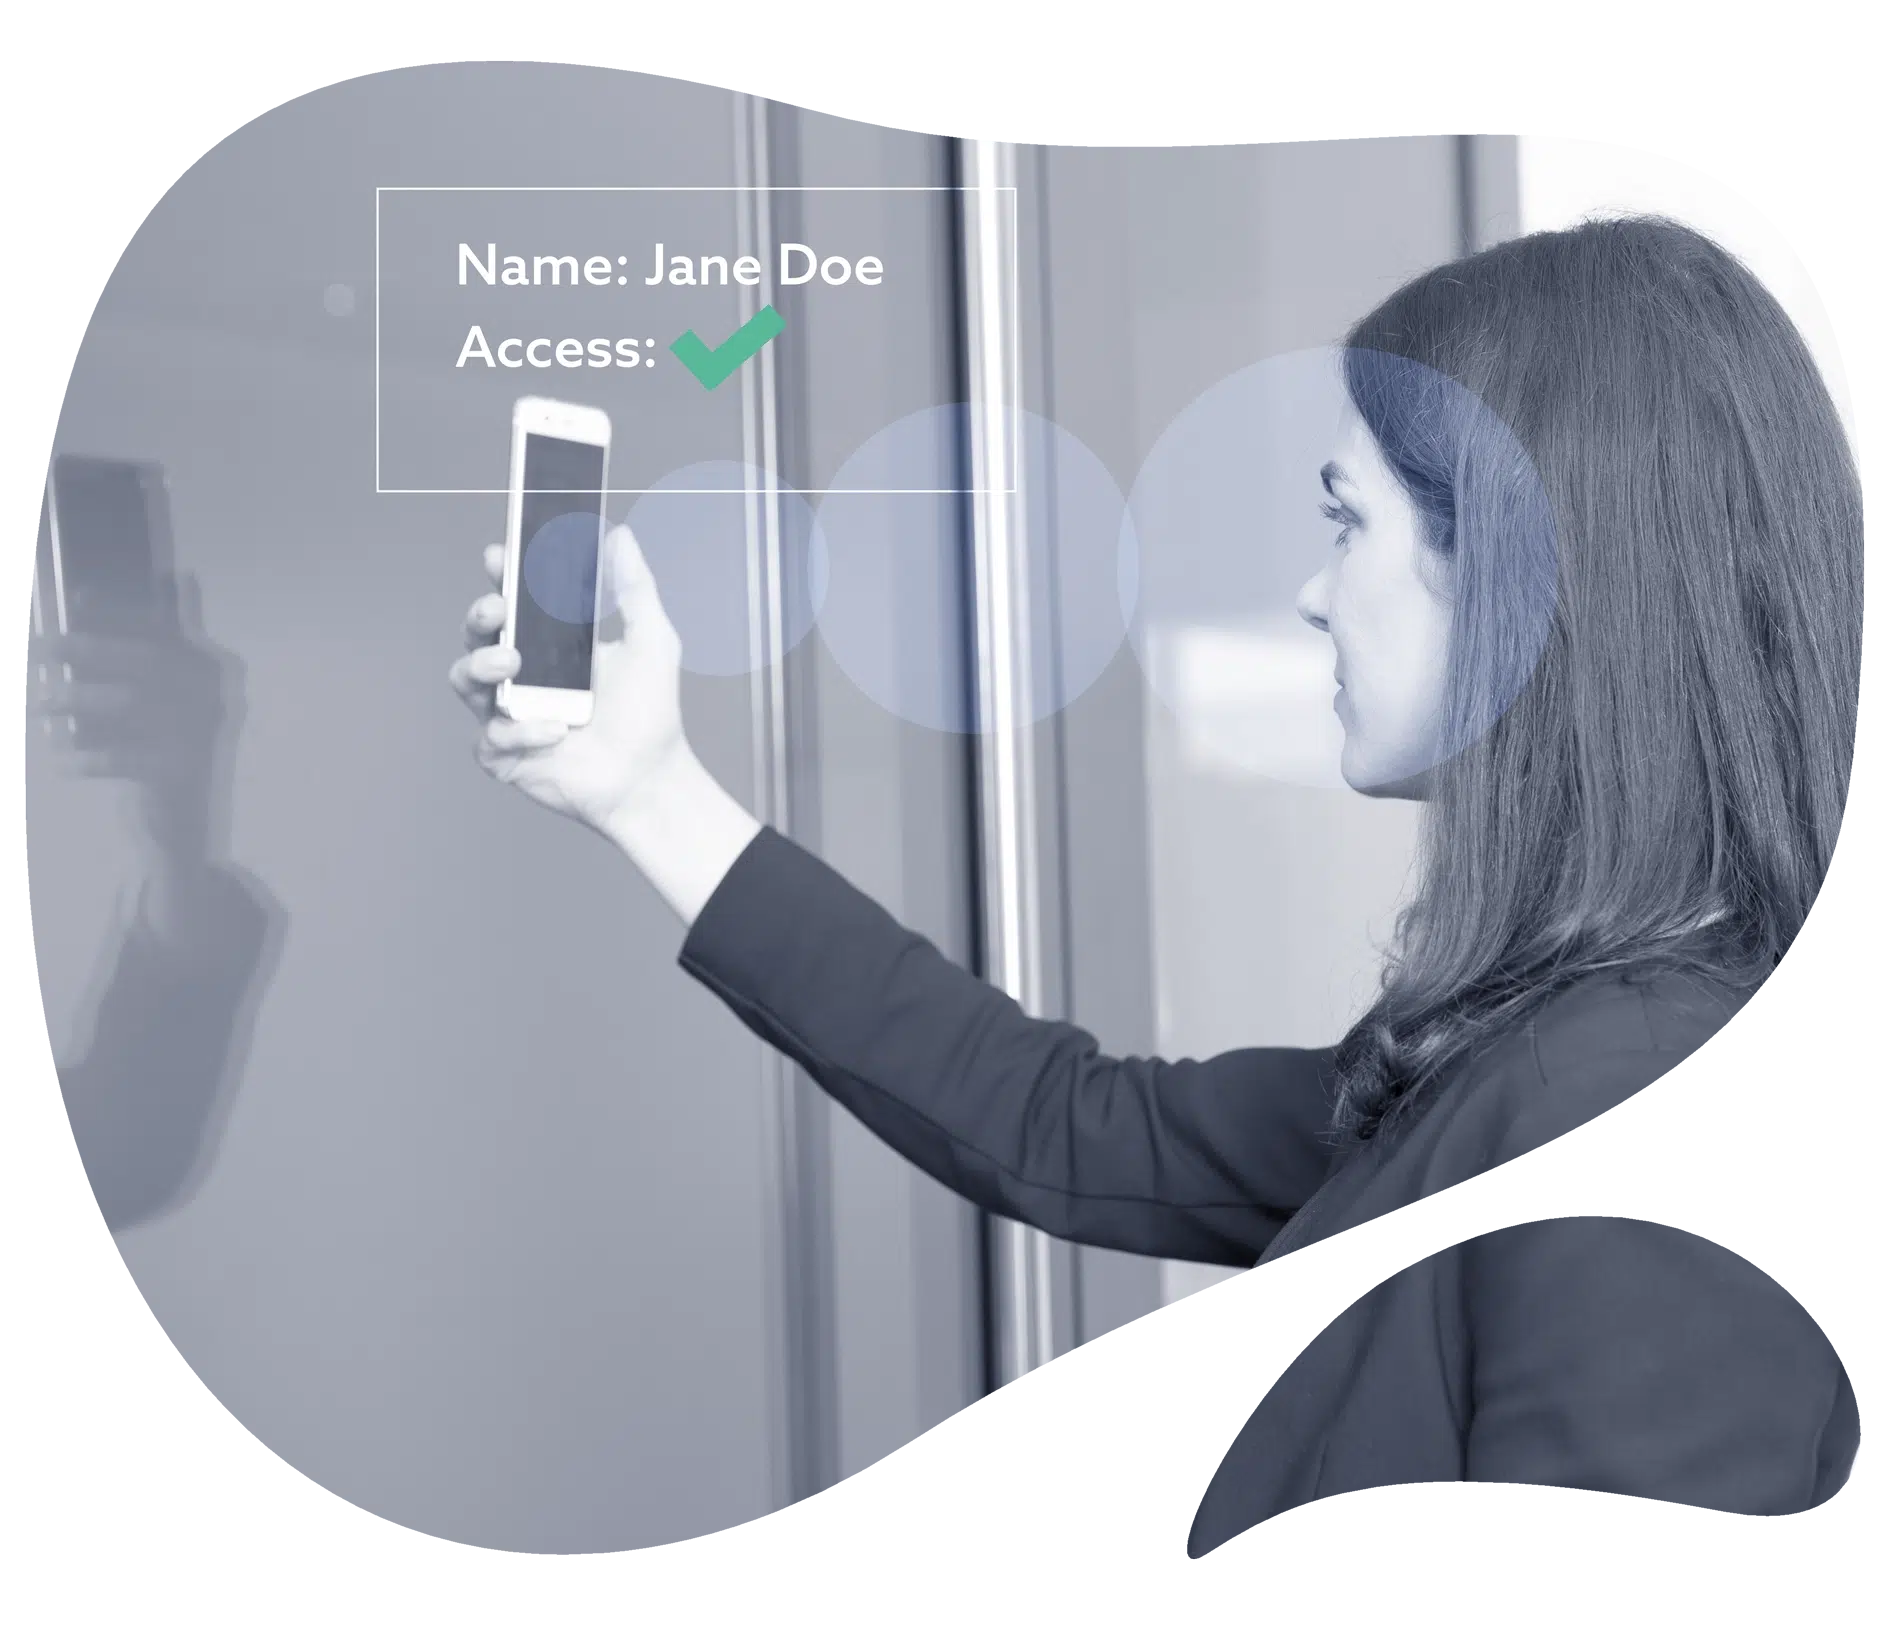 Access control with biometric authentication via smartphone